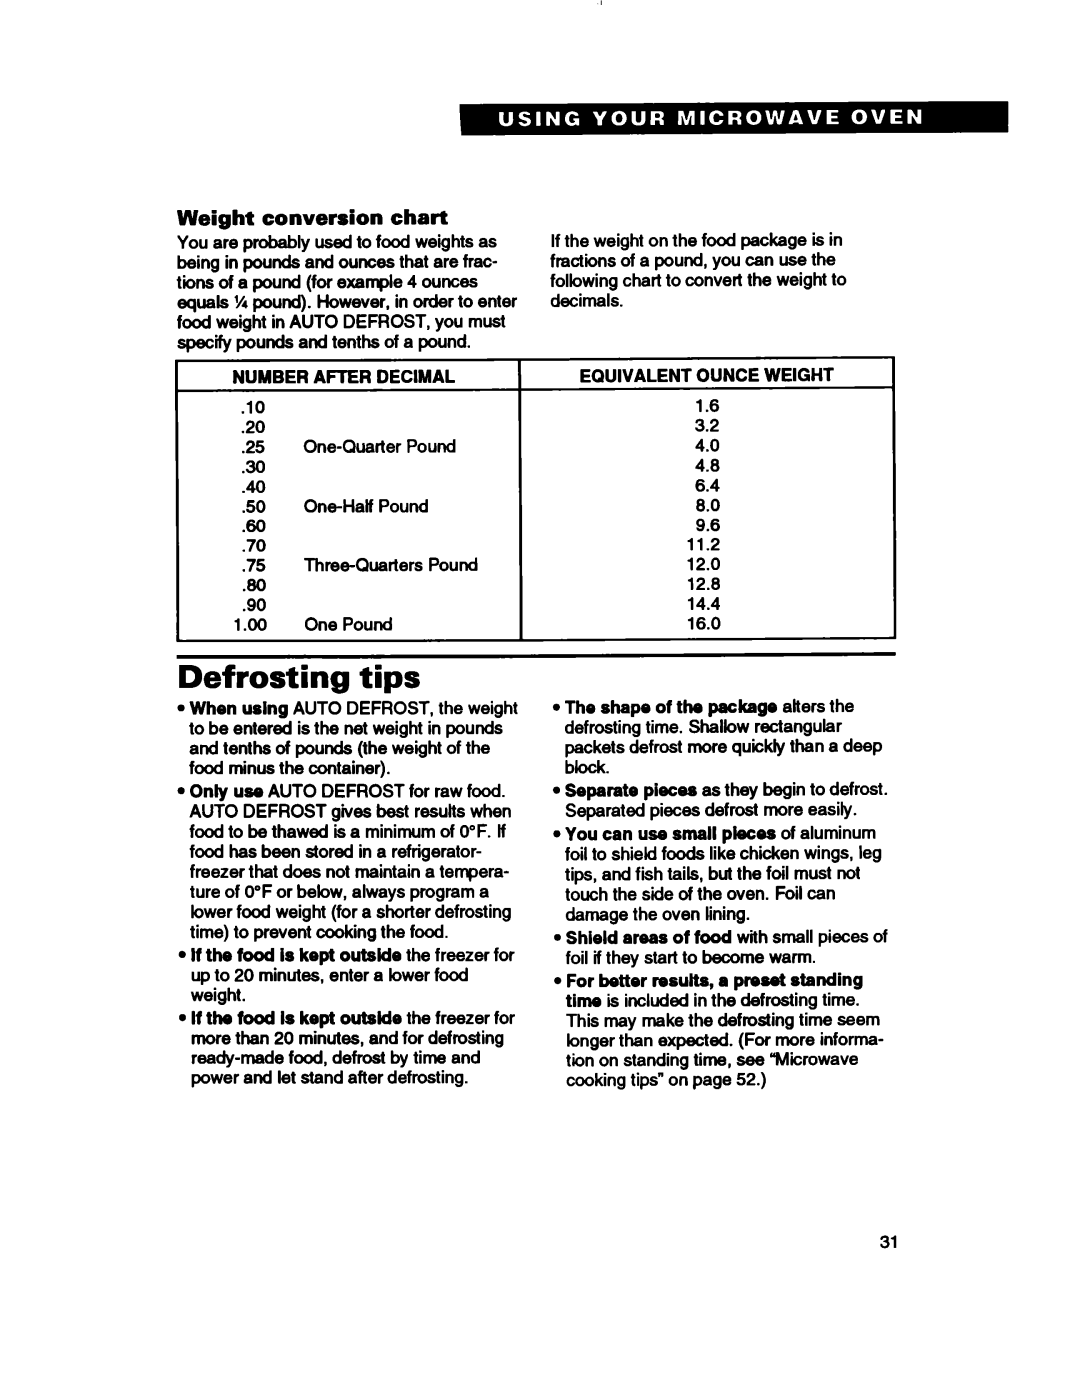 Whirlpool MH7110XB warranty Defrosting tips, Weight conversion chart 